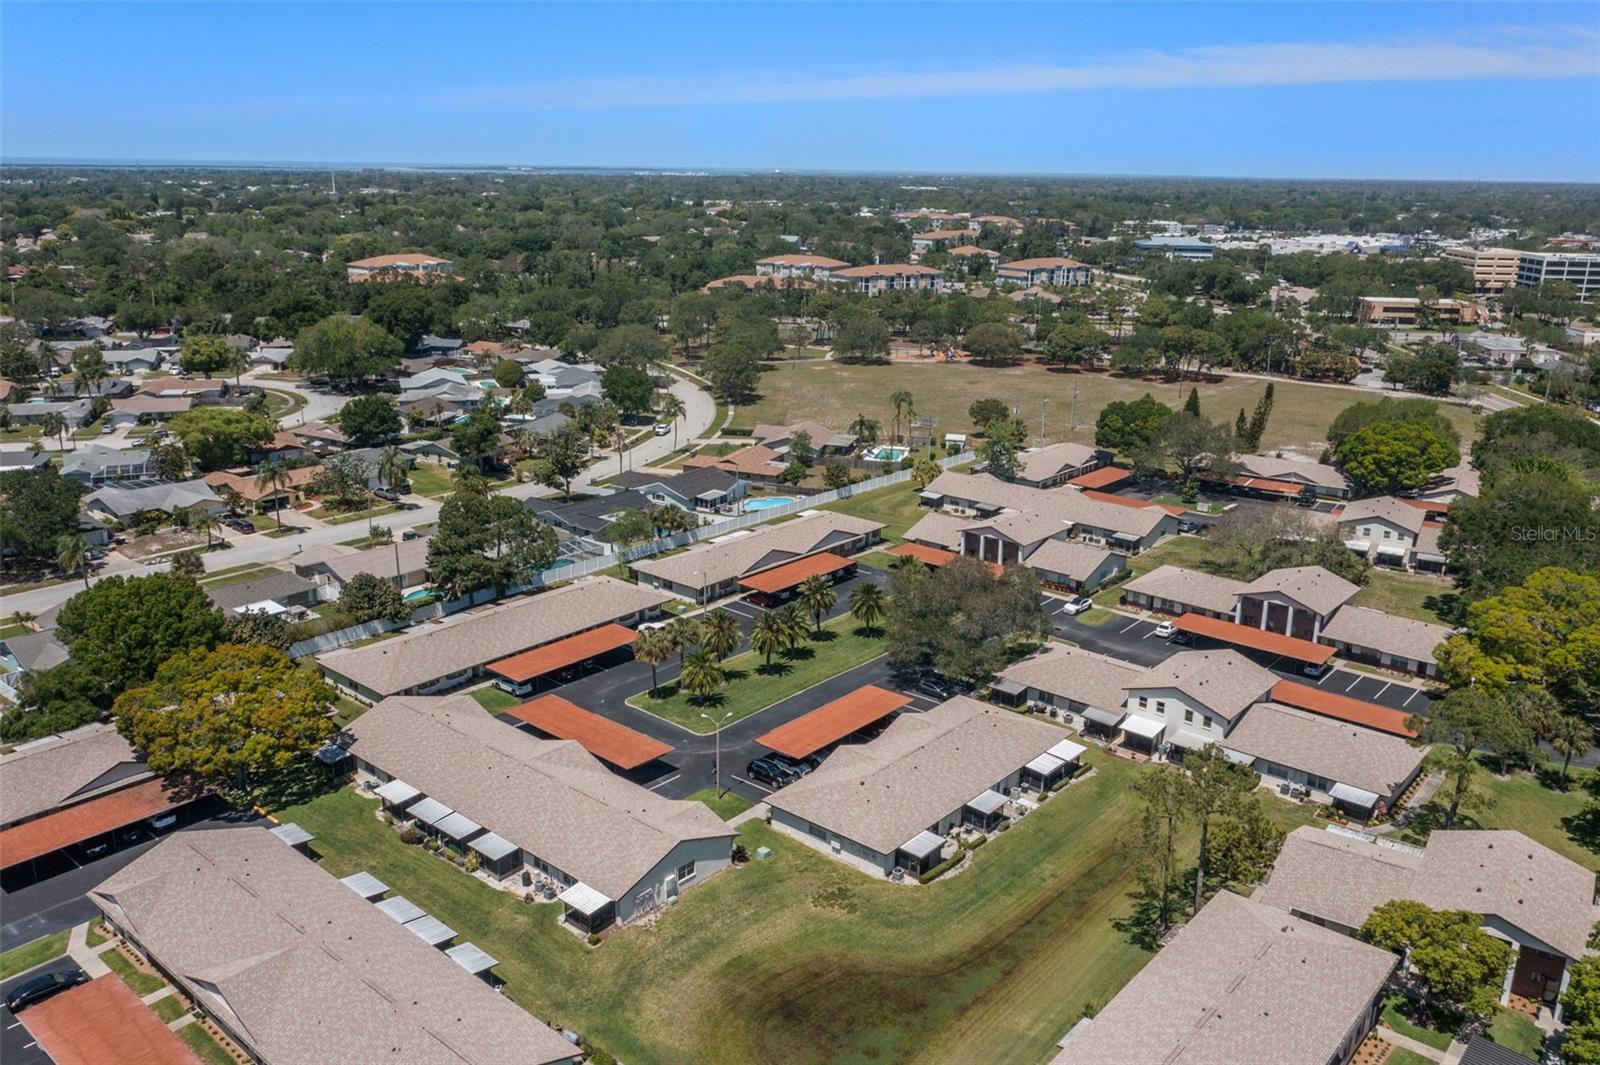 Here's an aerial view of The Villas at Countryside.